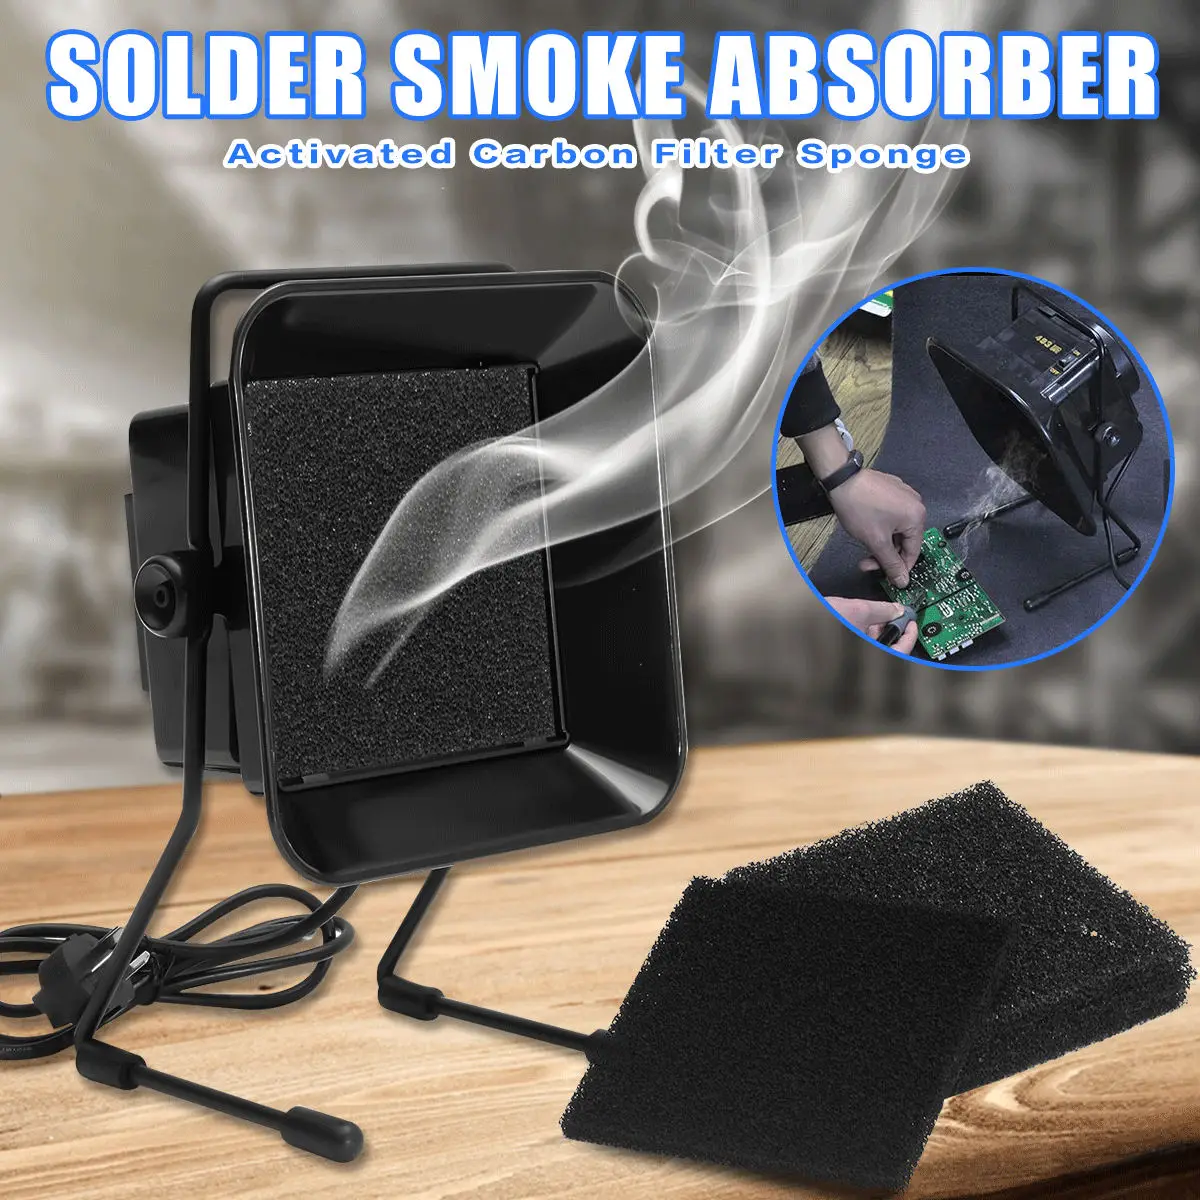 Activated Carbon Filter Solder Smoke Absorber ESD Fume Extractor Filter Sponge